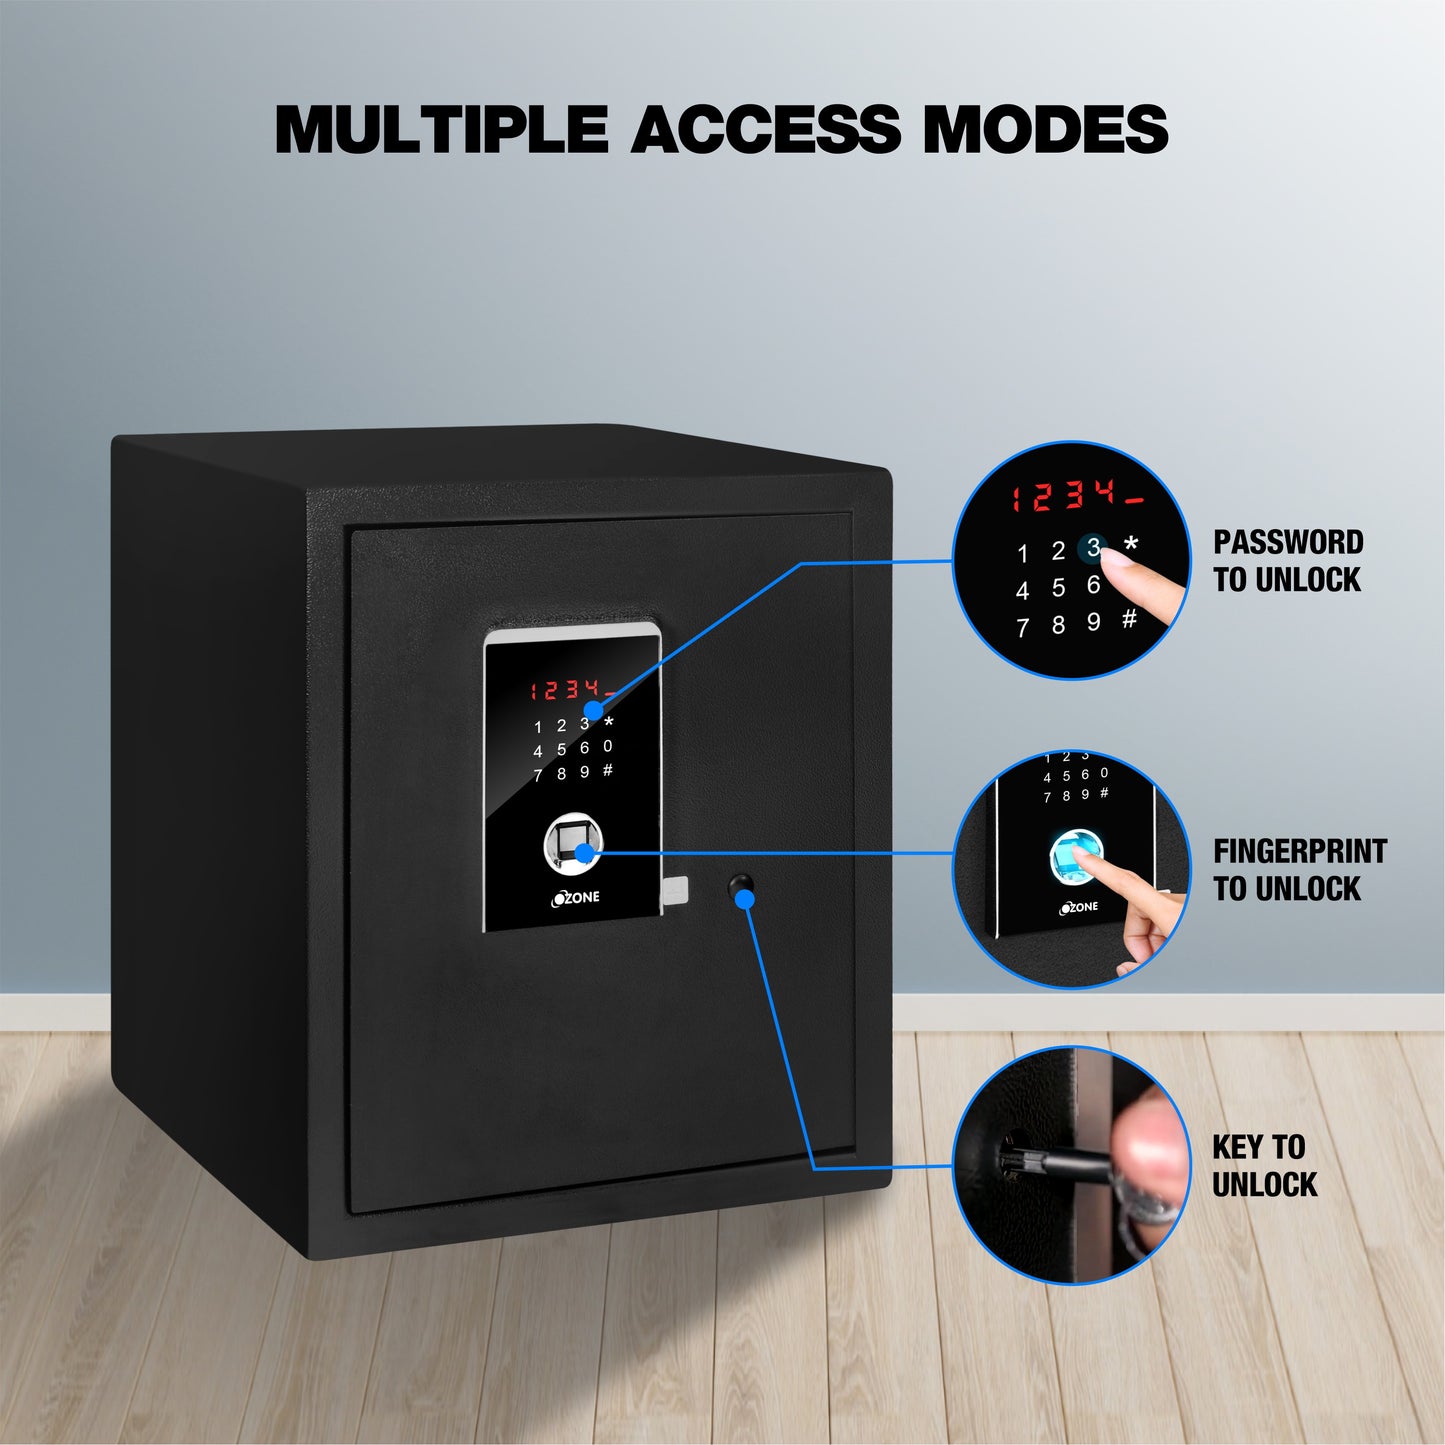 Ozone Biometric Safe for Homes, Offices & Warehouses | 3-way Access | Fingerprint, Password & Emergency Key (40 Ltrs.)